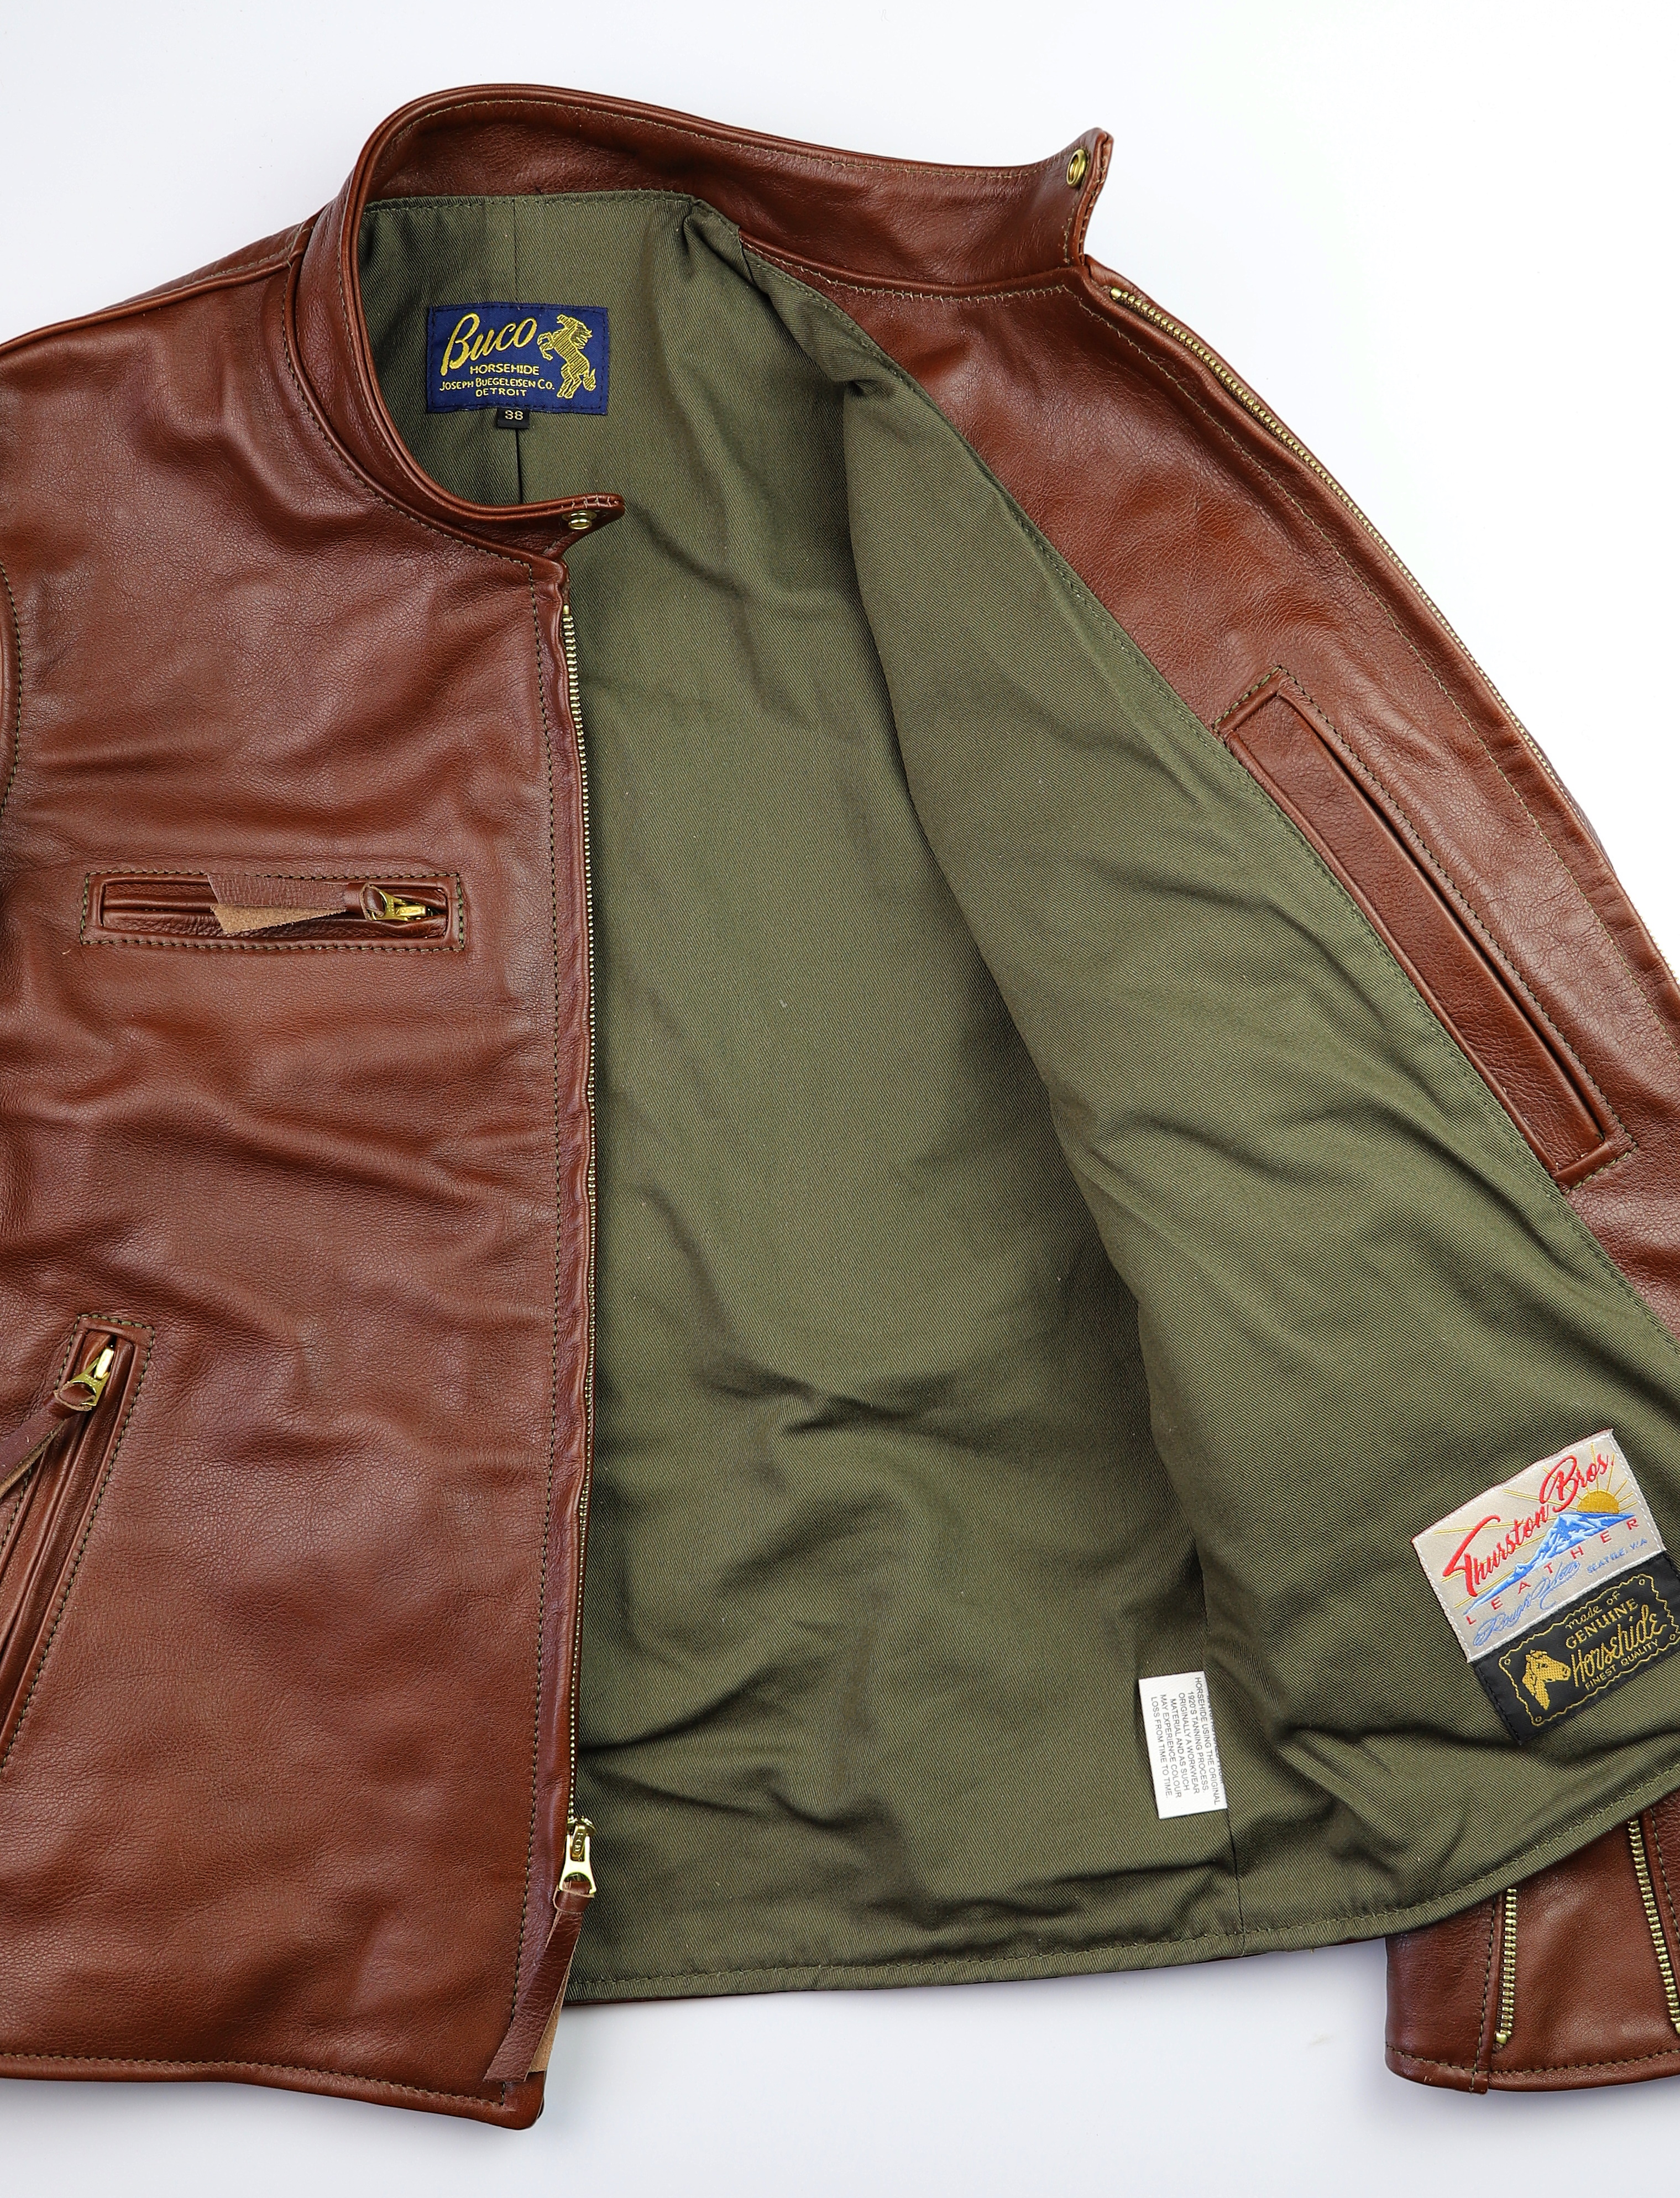 Aero Board Racer Russet Vicenza Horsehide EBN olive cotton drill.jpg